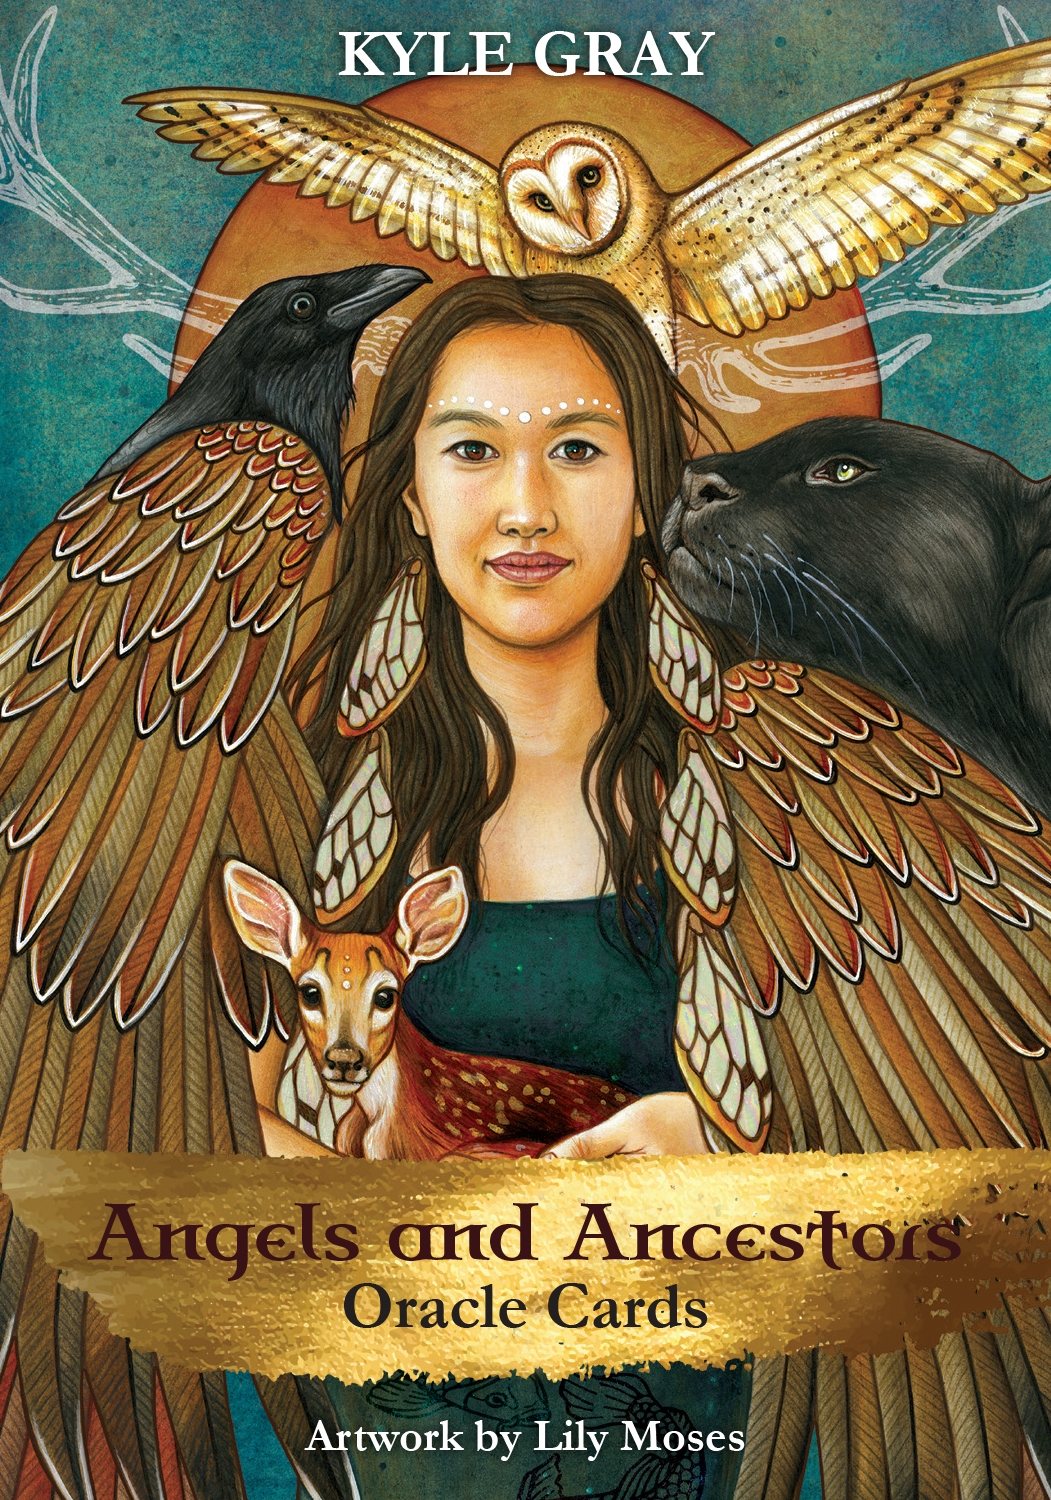 Angels and Ancestors Oracle Cards - Mystery Arts Online Store